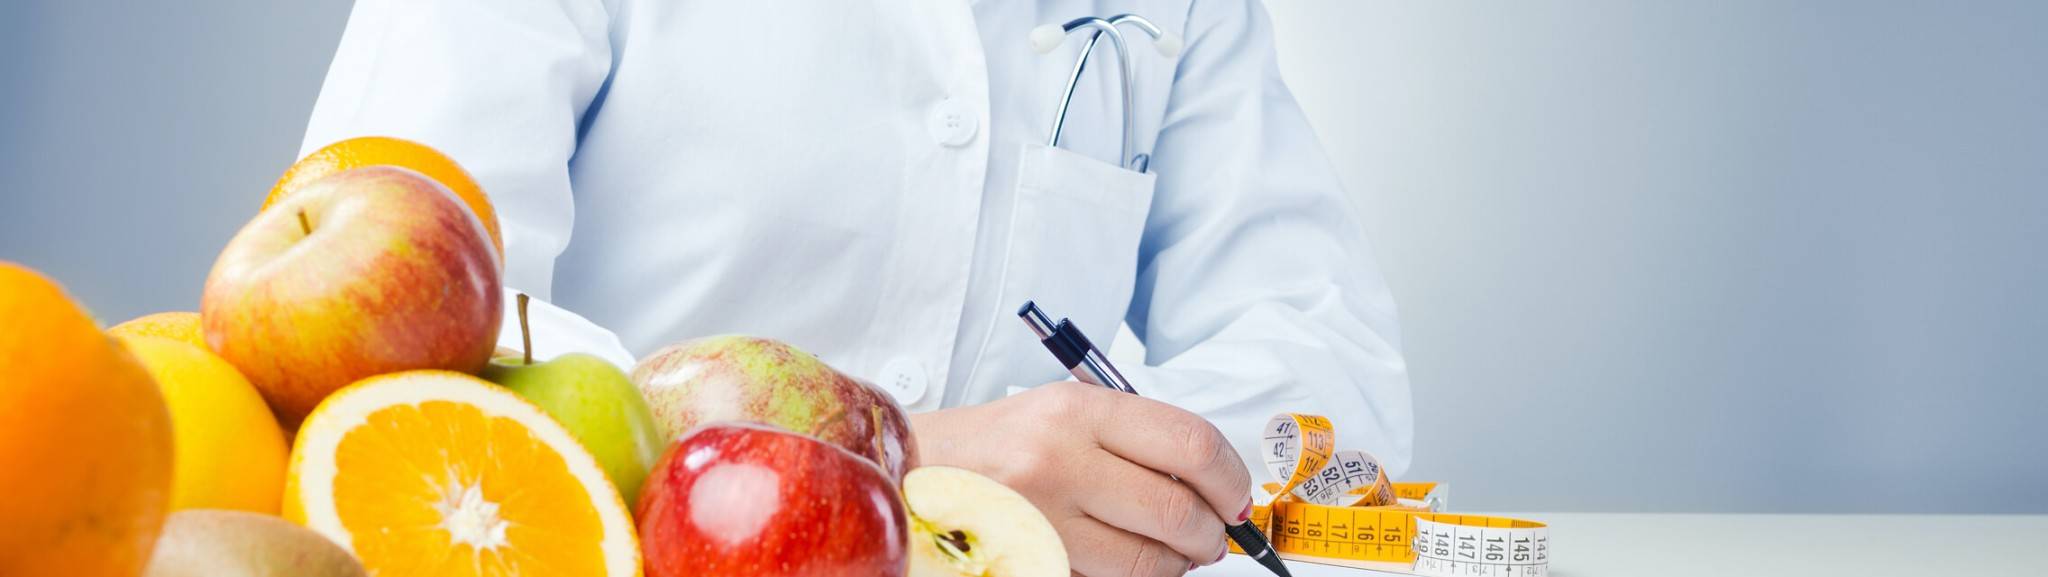 cs-as-nutrition_counseling_diabetes-banner@2x